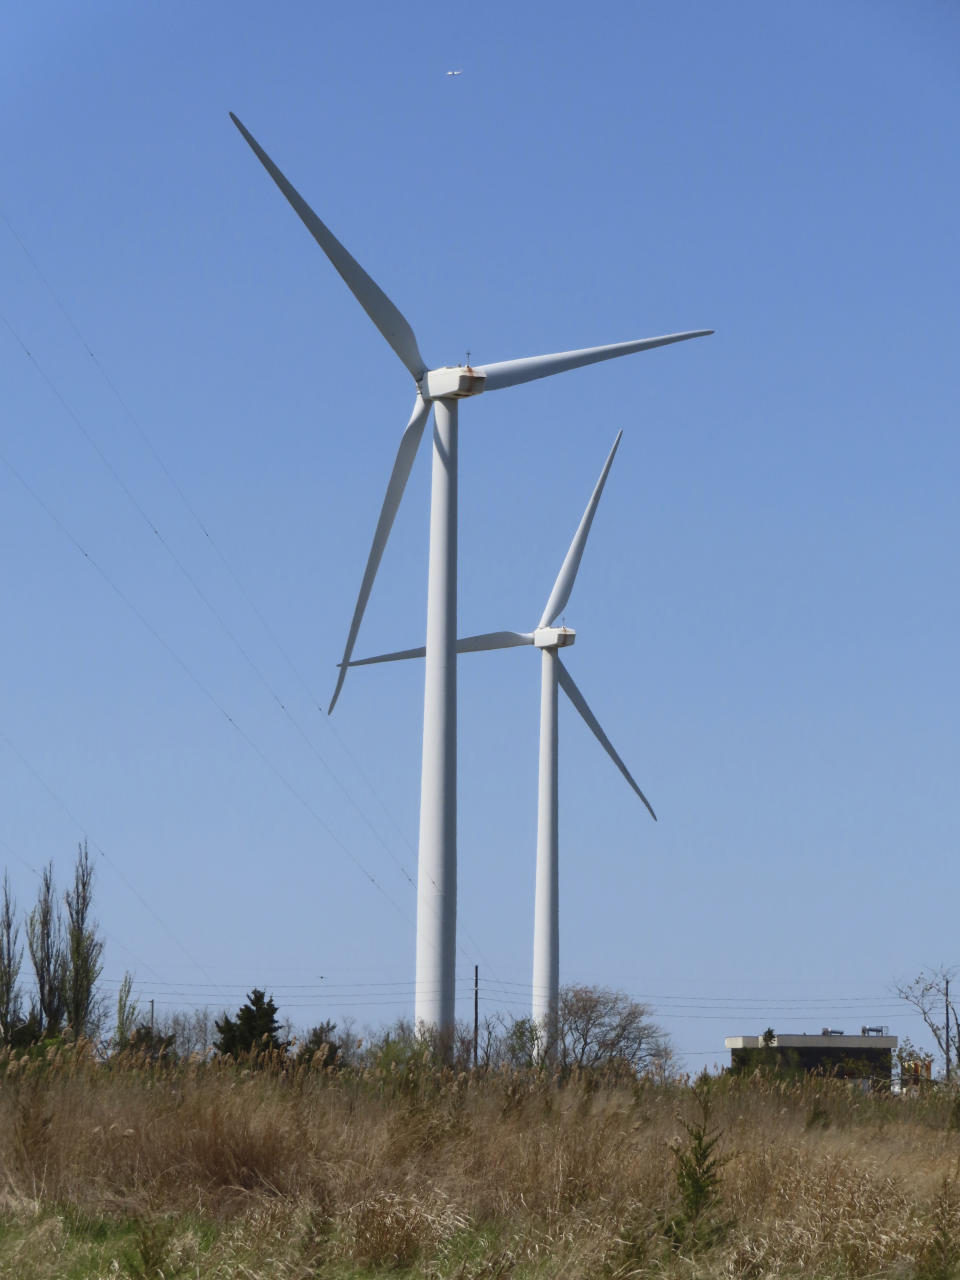 Land-based windmills turn in the wind in Atlantic City, N.J., on April 28, 2022. On July 3, 2023, Atlantic Shores, the approved developer of New Jersey's third offshore wind farm, said it, too, wants a tax break or other financial assistance, hinting that its project might not be able to be done without the kind of assistance New Jersey lawmakers granted the week before to a competitor, Orsted, which has approval to build two of the state's three approved offshore wind farms. (AP Photo/Wayne Parry)